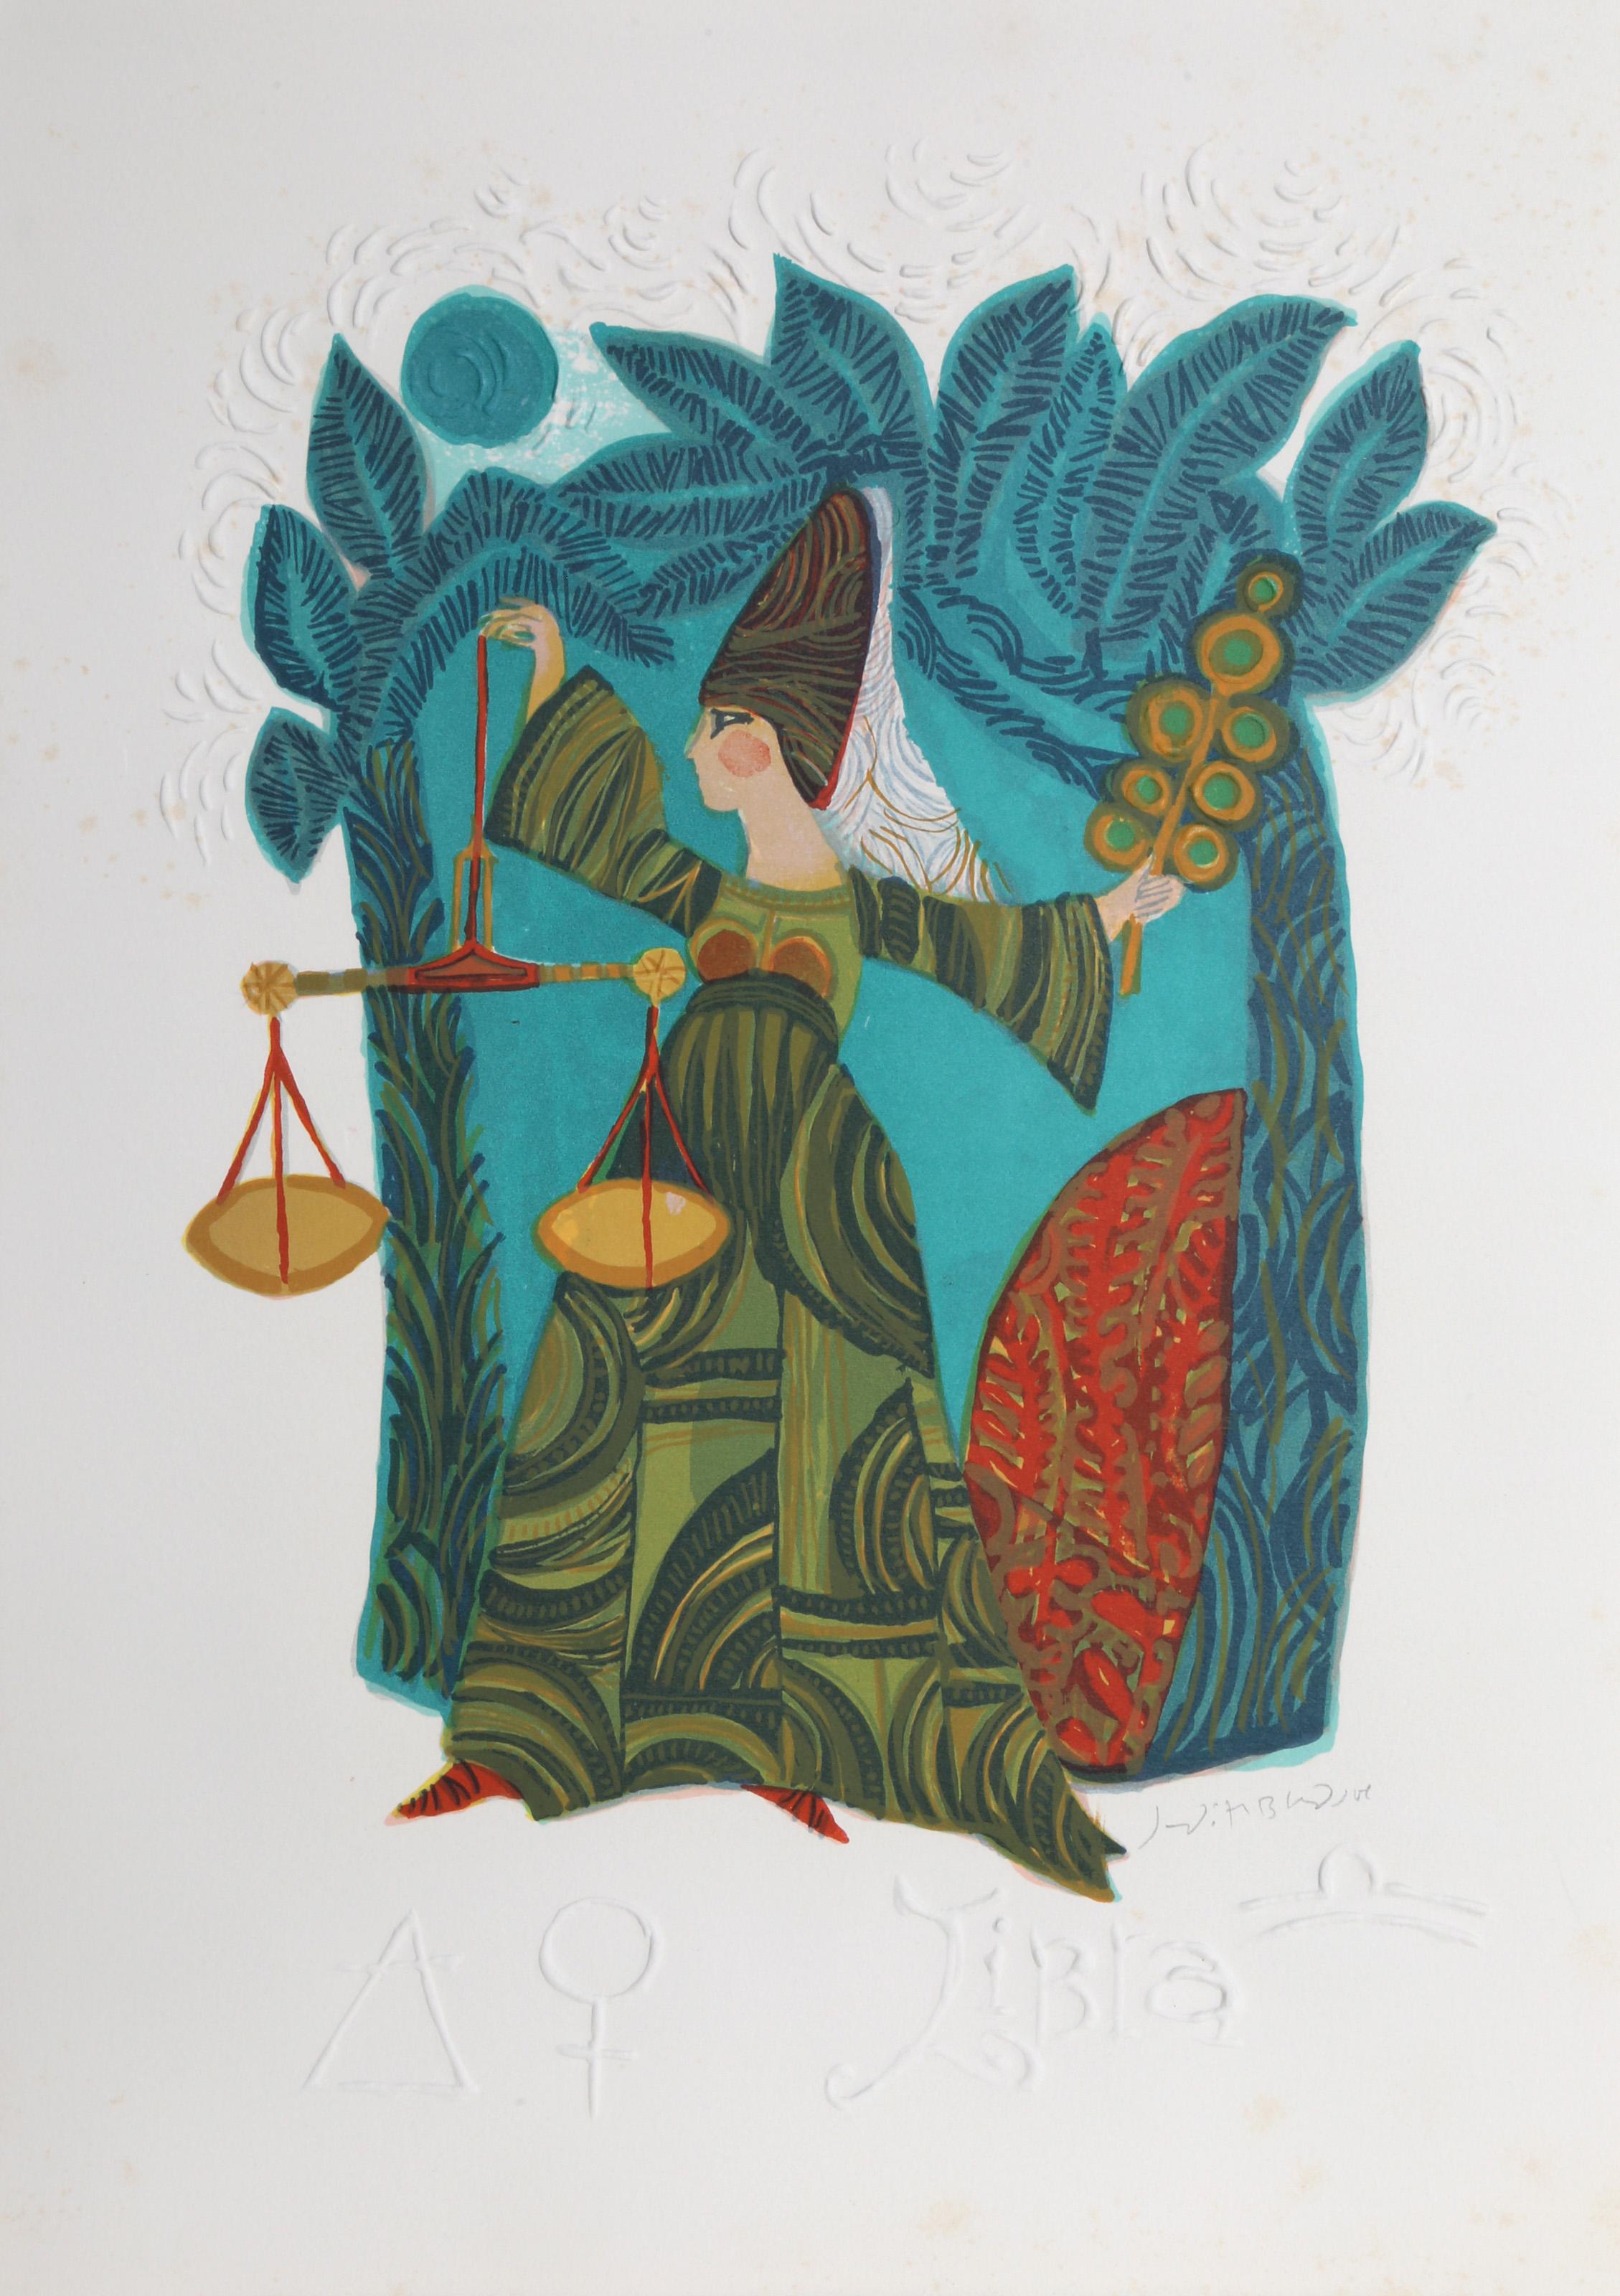 Judith Bledsoe, American (1938 - 2013) -  Libra from the Zodiac of Dreams Series. Year: circa 1970, Medium: Lithograph with Embossing, signed in pencil, Edition: EA, Size: 21 x 14.5 in. (53.34 x 36.83 cm), Description: Wearing a floor-length gown of